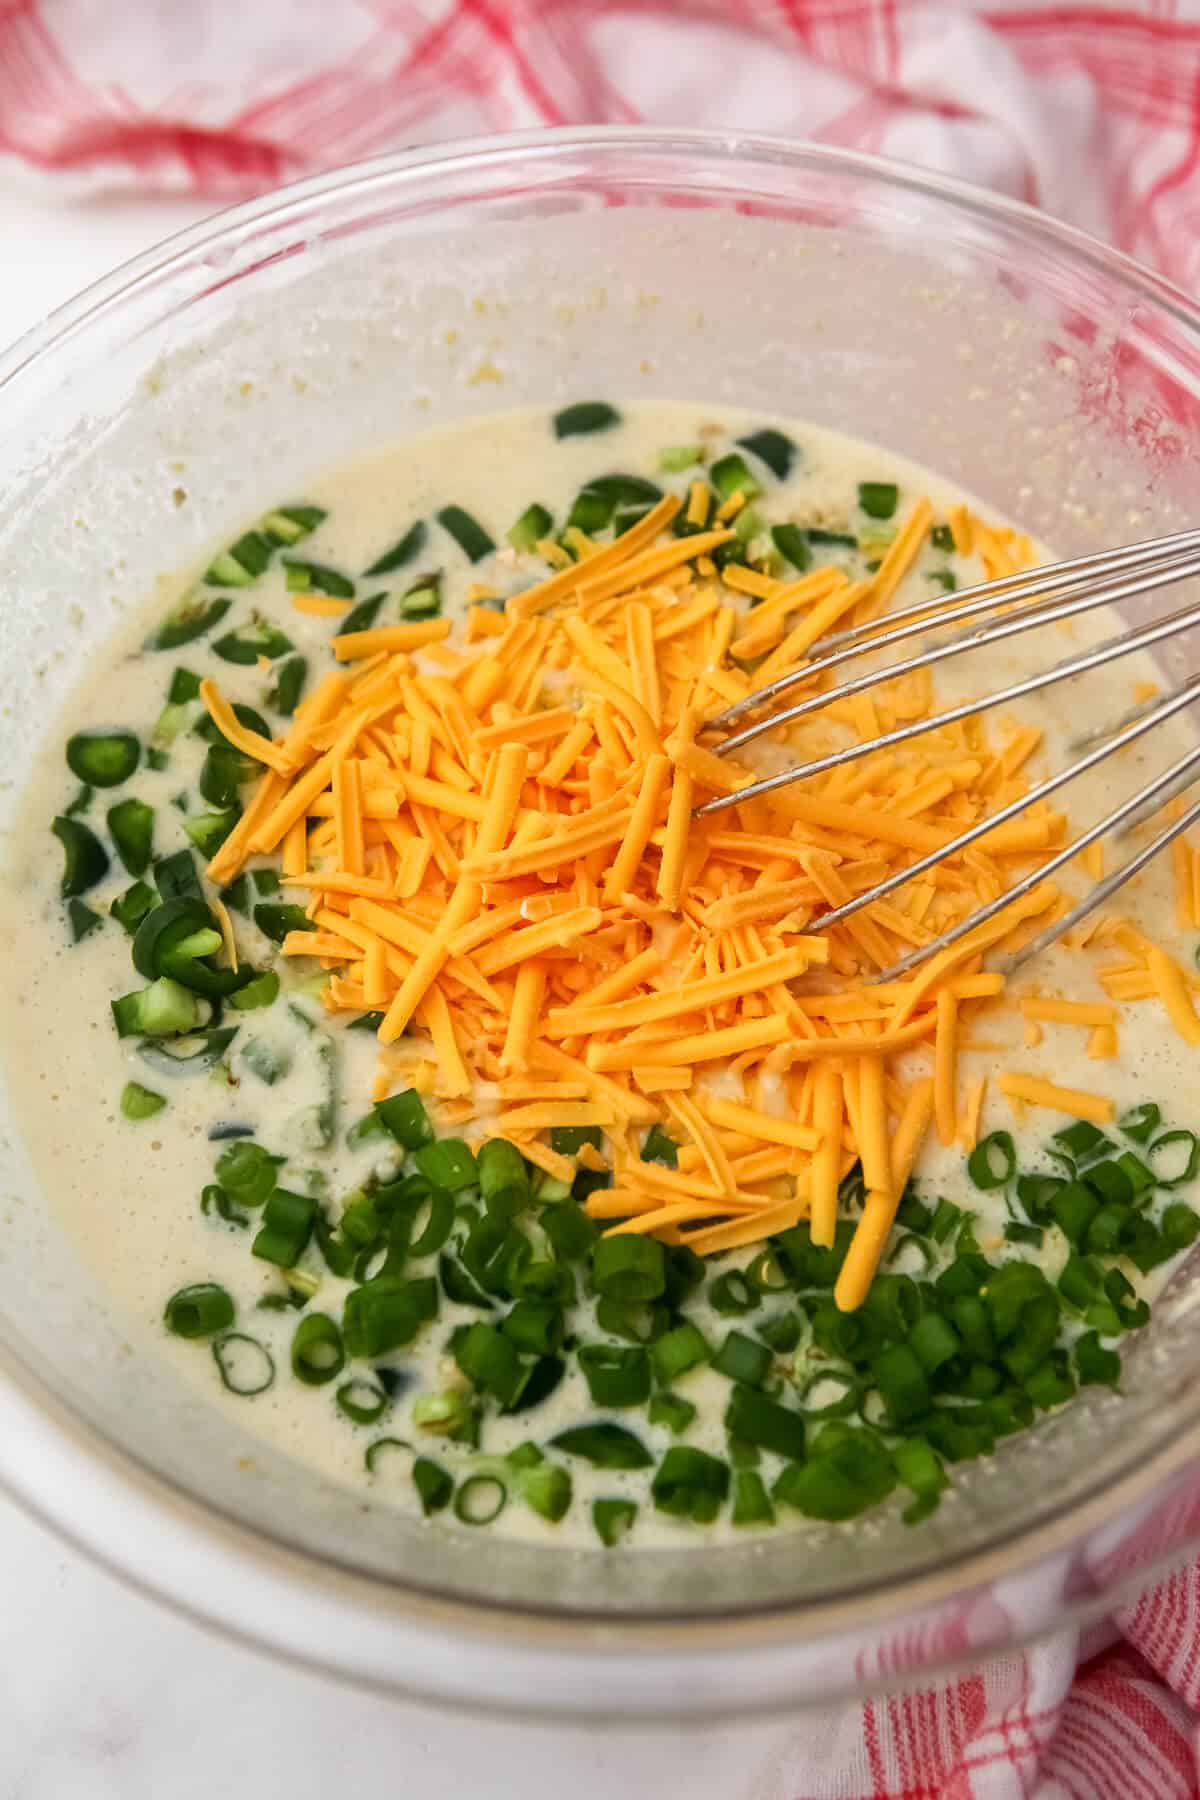 A mixing bowl with vegan cornbread batter, jalapenos, green onions, and vegan cheese.